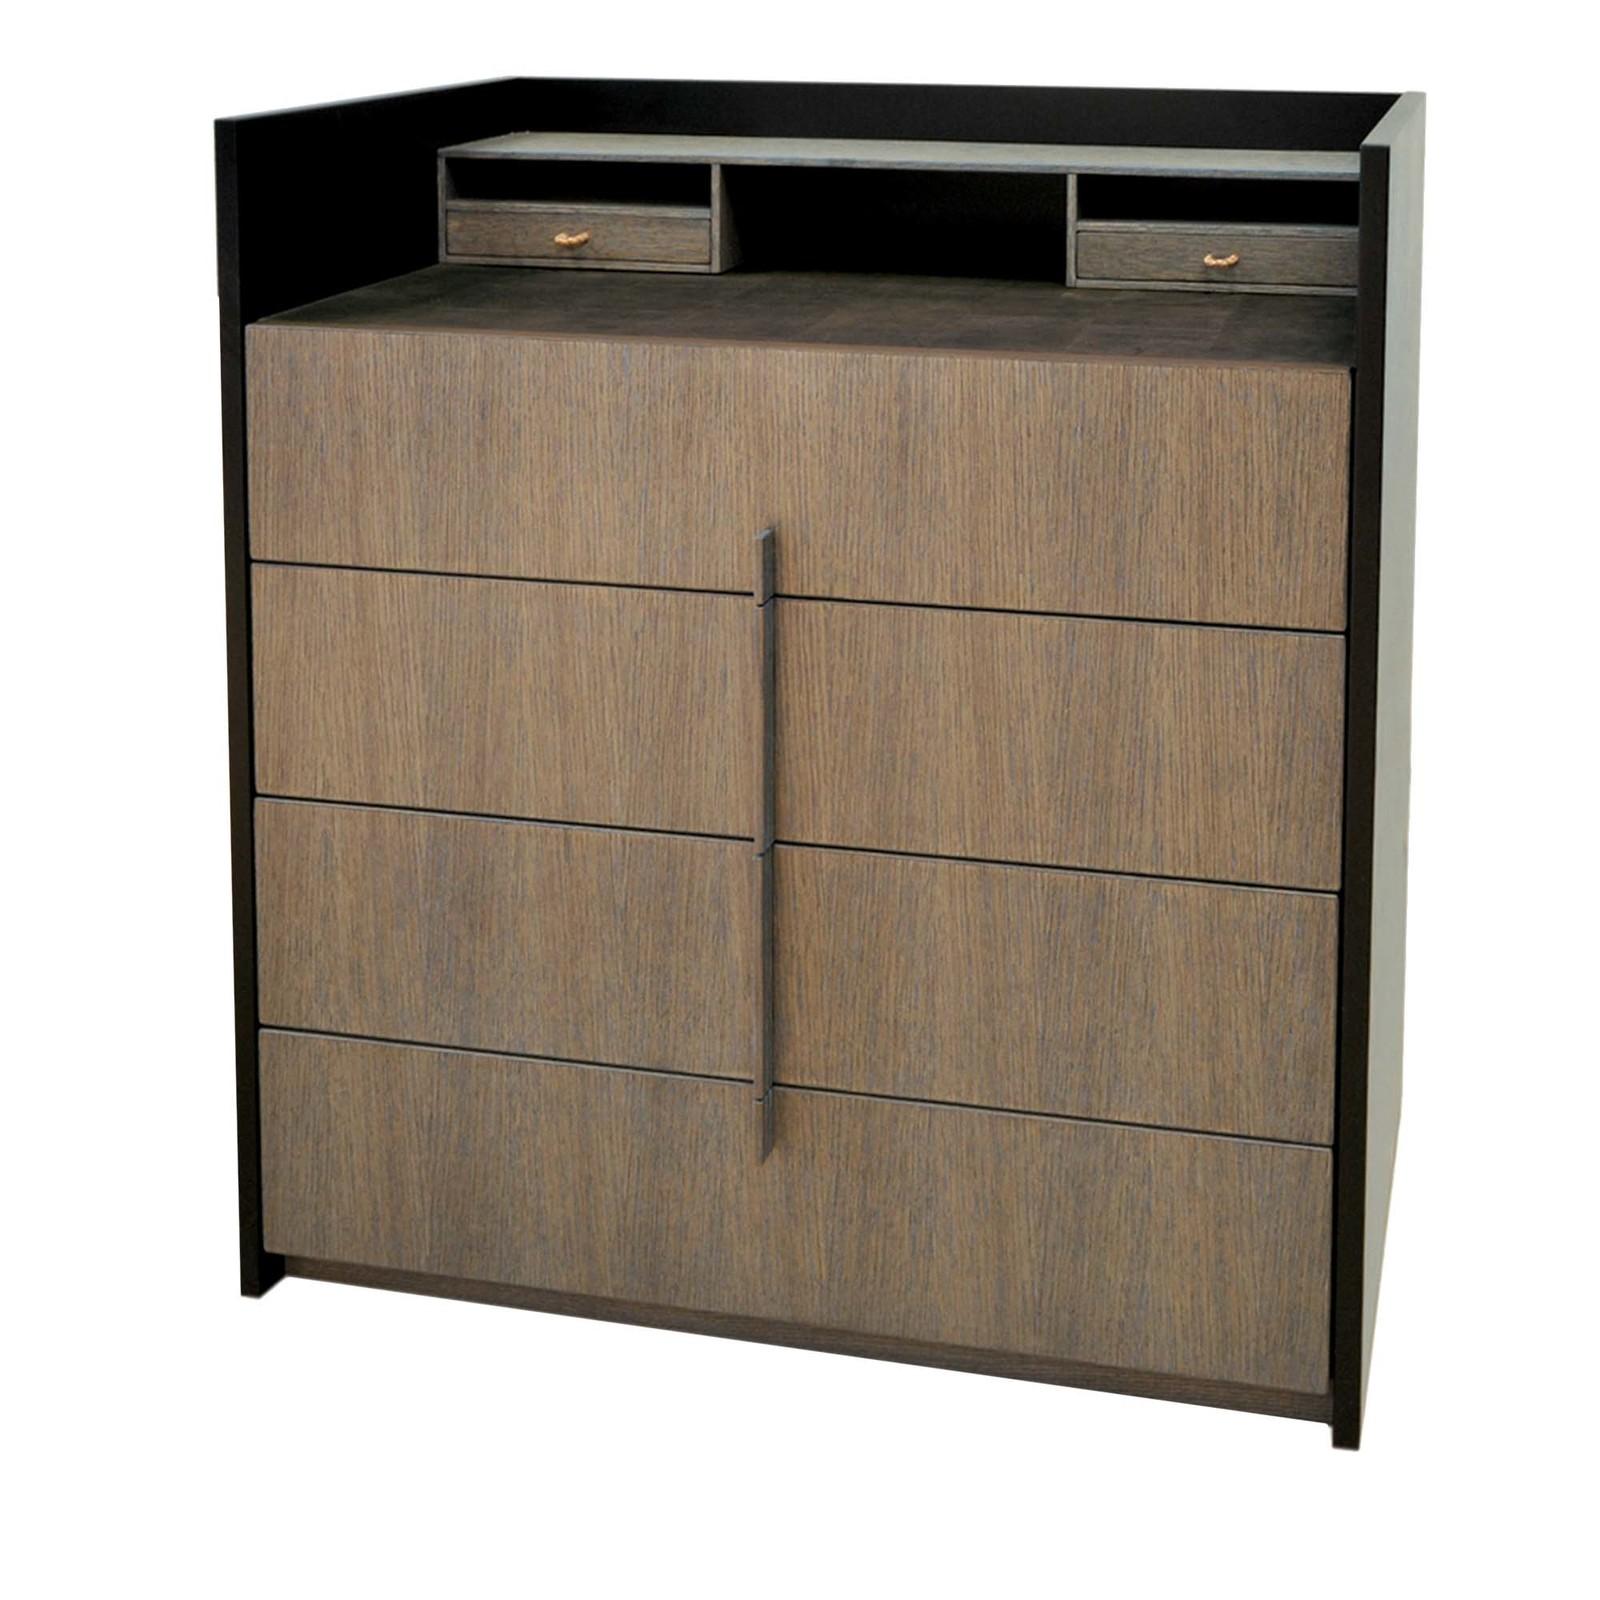 Simple in design yet rich in details, this chest of drawers elevates the essence of minimalism. Encased in a black stained oak frame, the cerused moss/indigo drawers are free of traditional handles but feature a vertical bar of stained oak (also